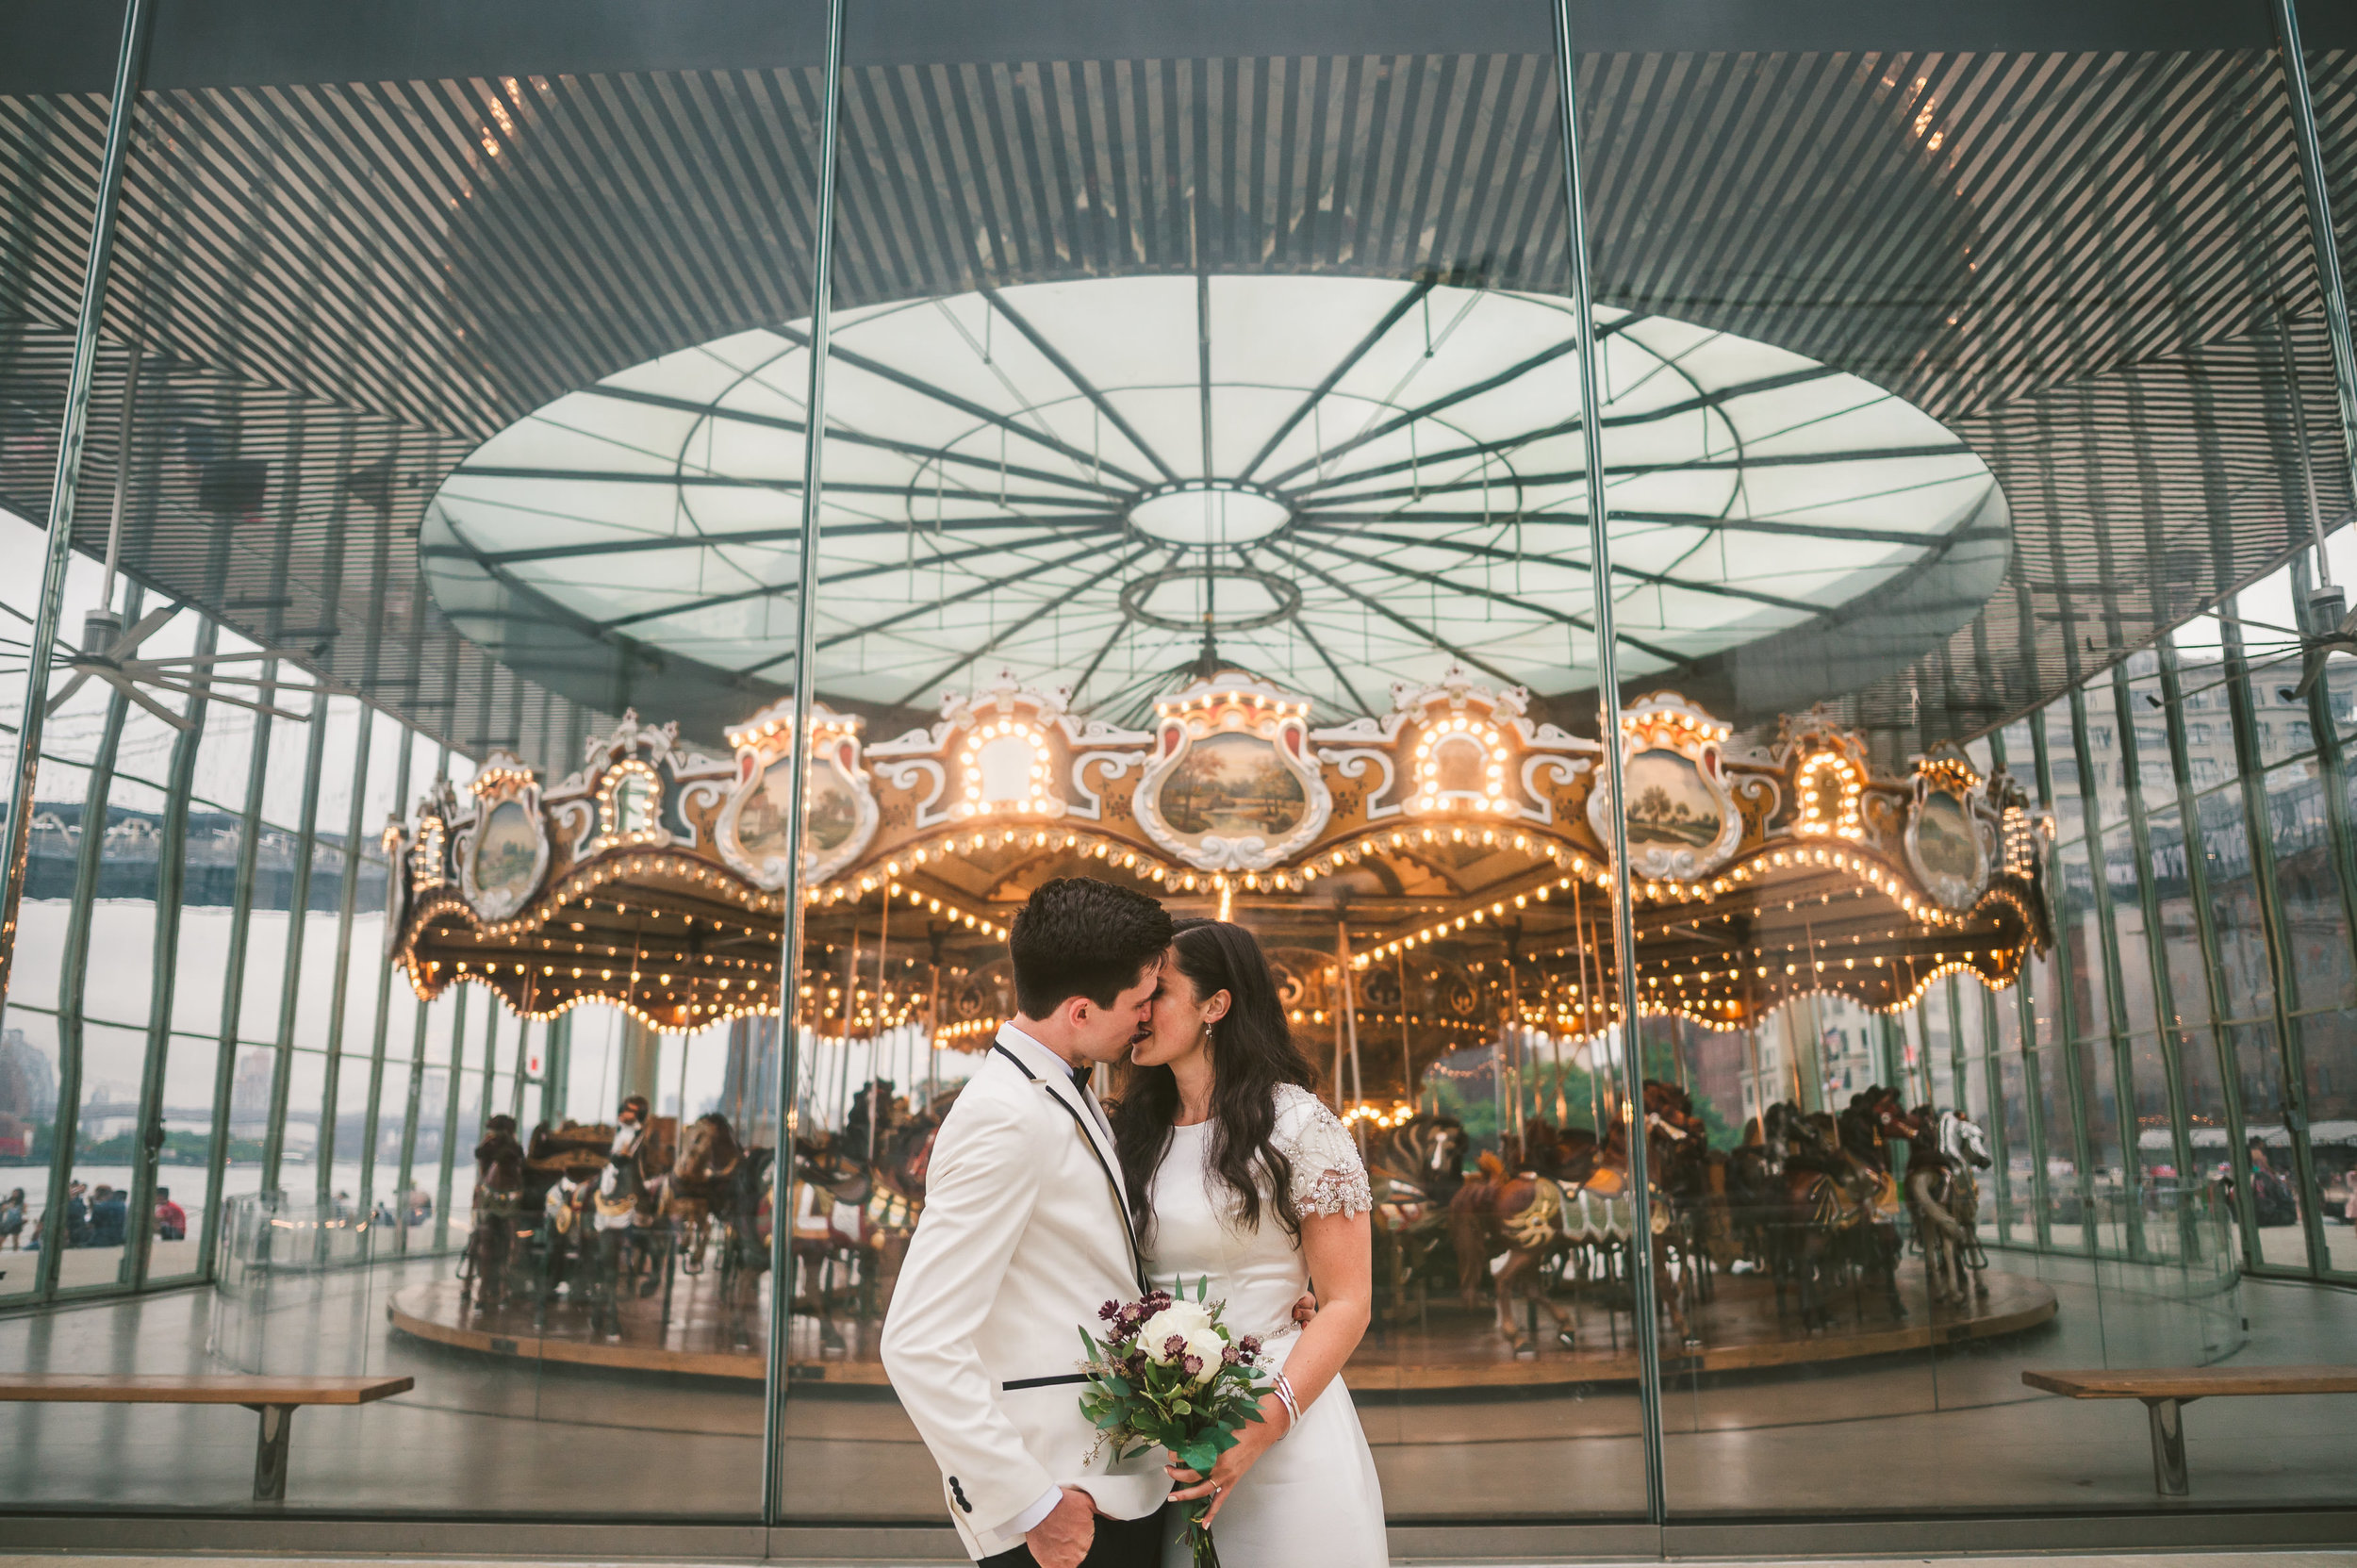 Bride and groom kissing at Jane's Carousel in DUMBO, New York for their destination elopmenet in NYC